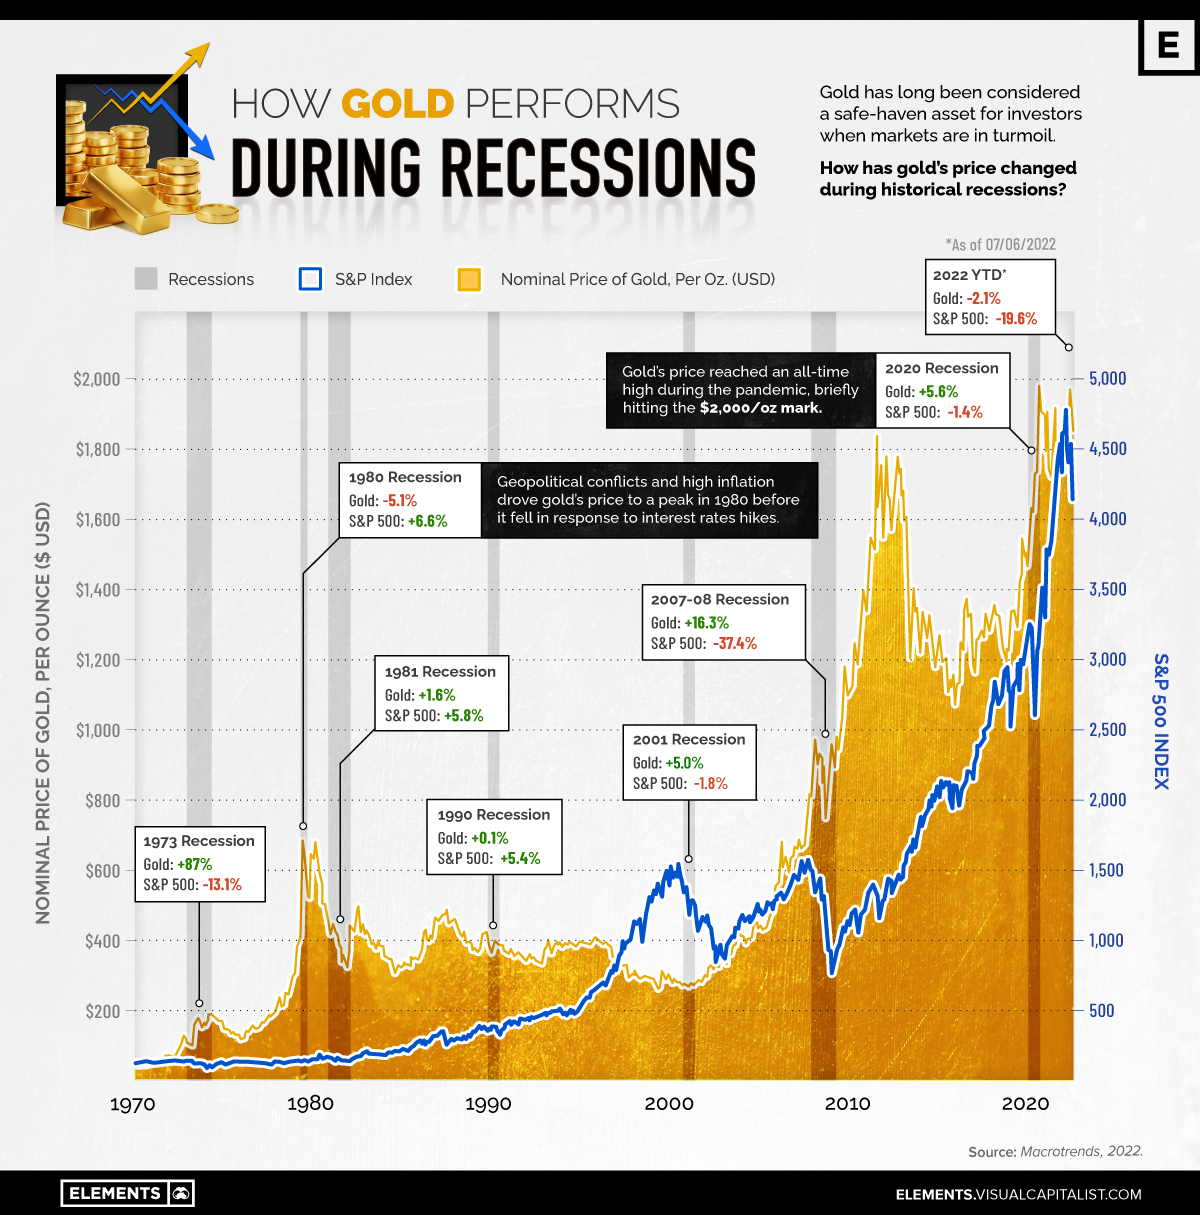 https://elements.visualcapitalist.com/wp-content/uploads/2022/07/gold-during-recessions.jpg